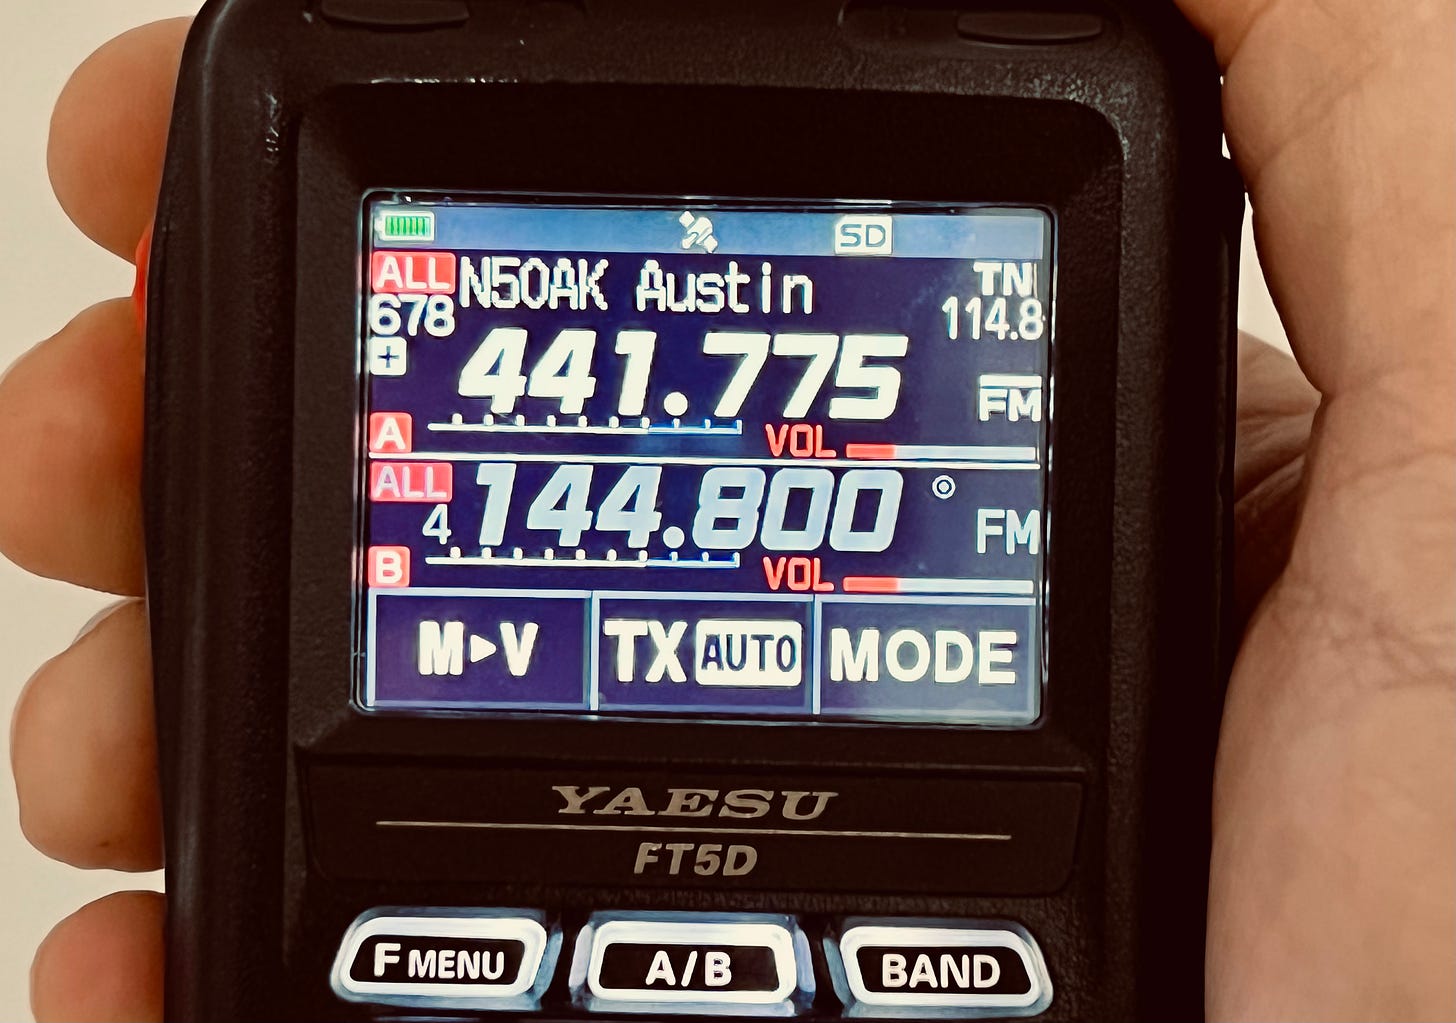 A hand hold a Yaesu FT5D with the frequency for the repeater N5 OAK visible on the screen